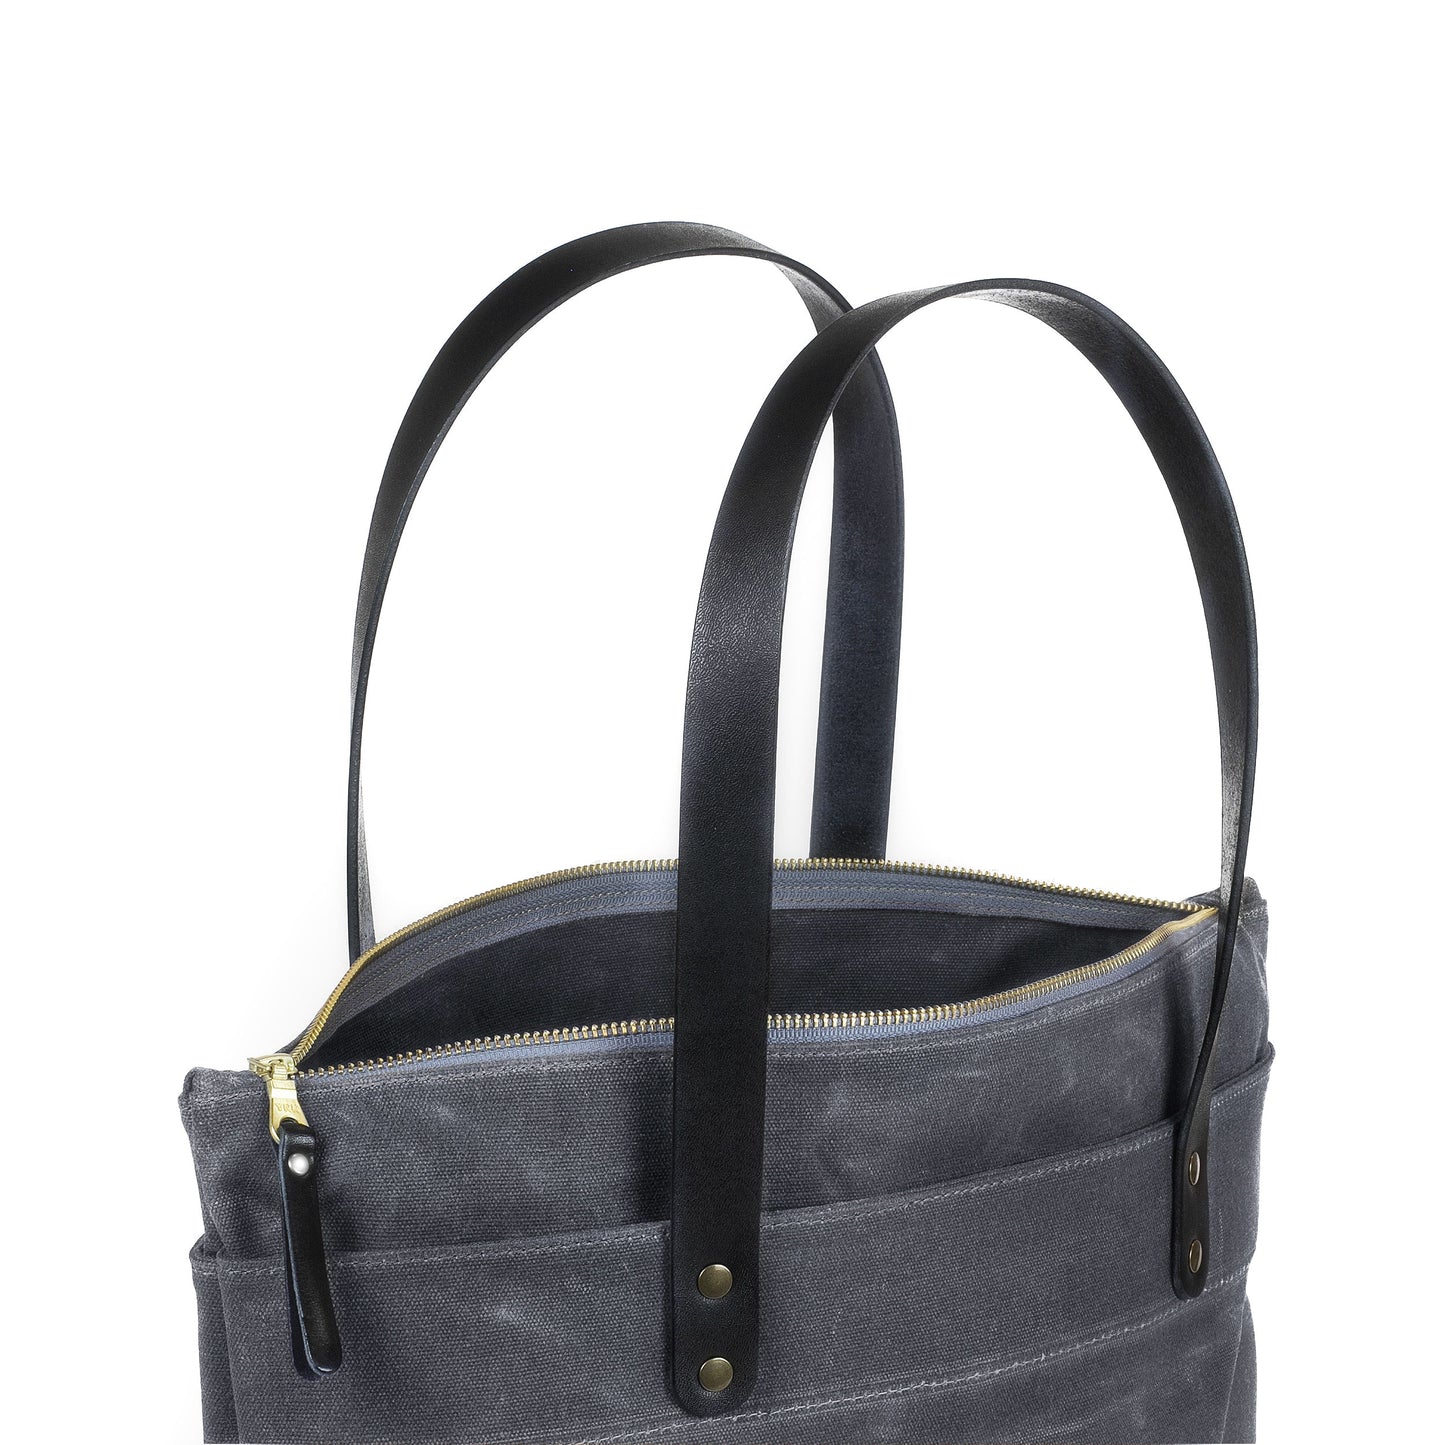 Zipper Tote Grey Waxed Canvas & Black Leather